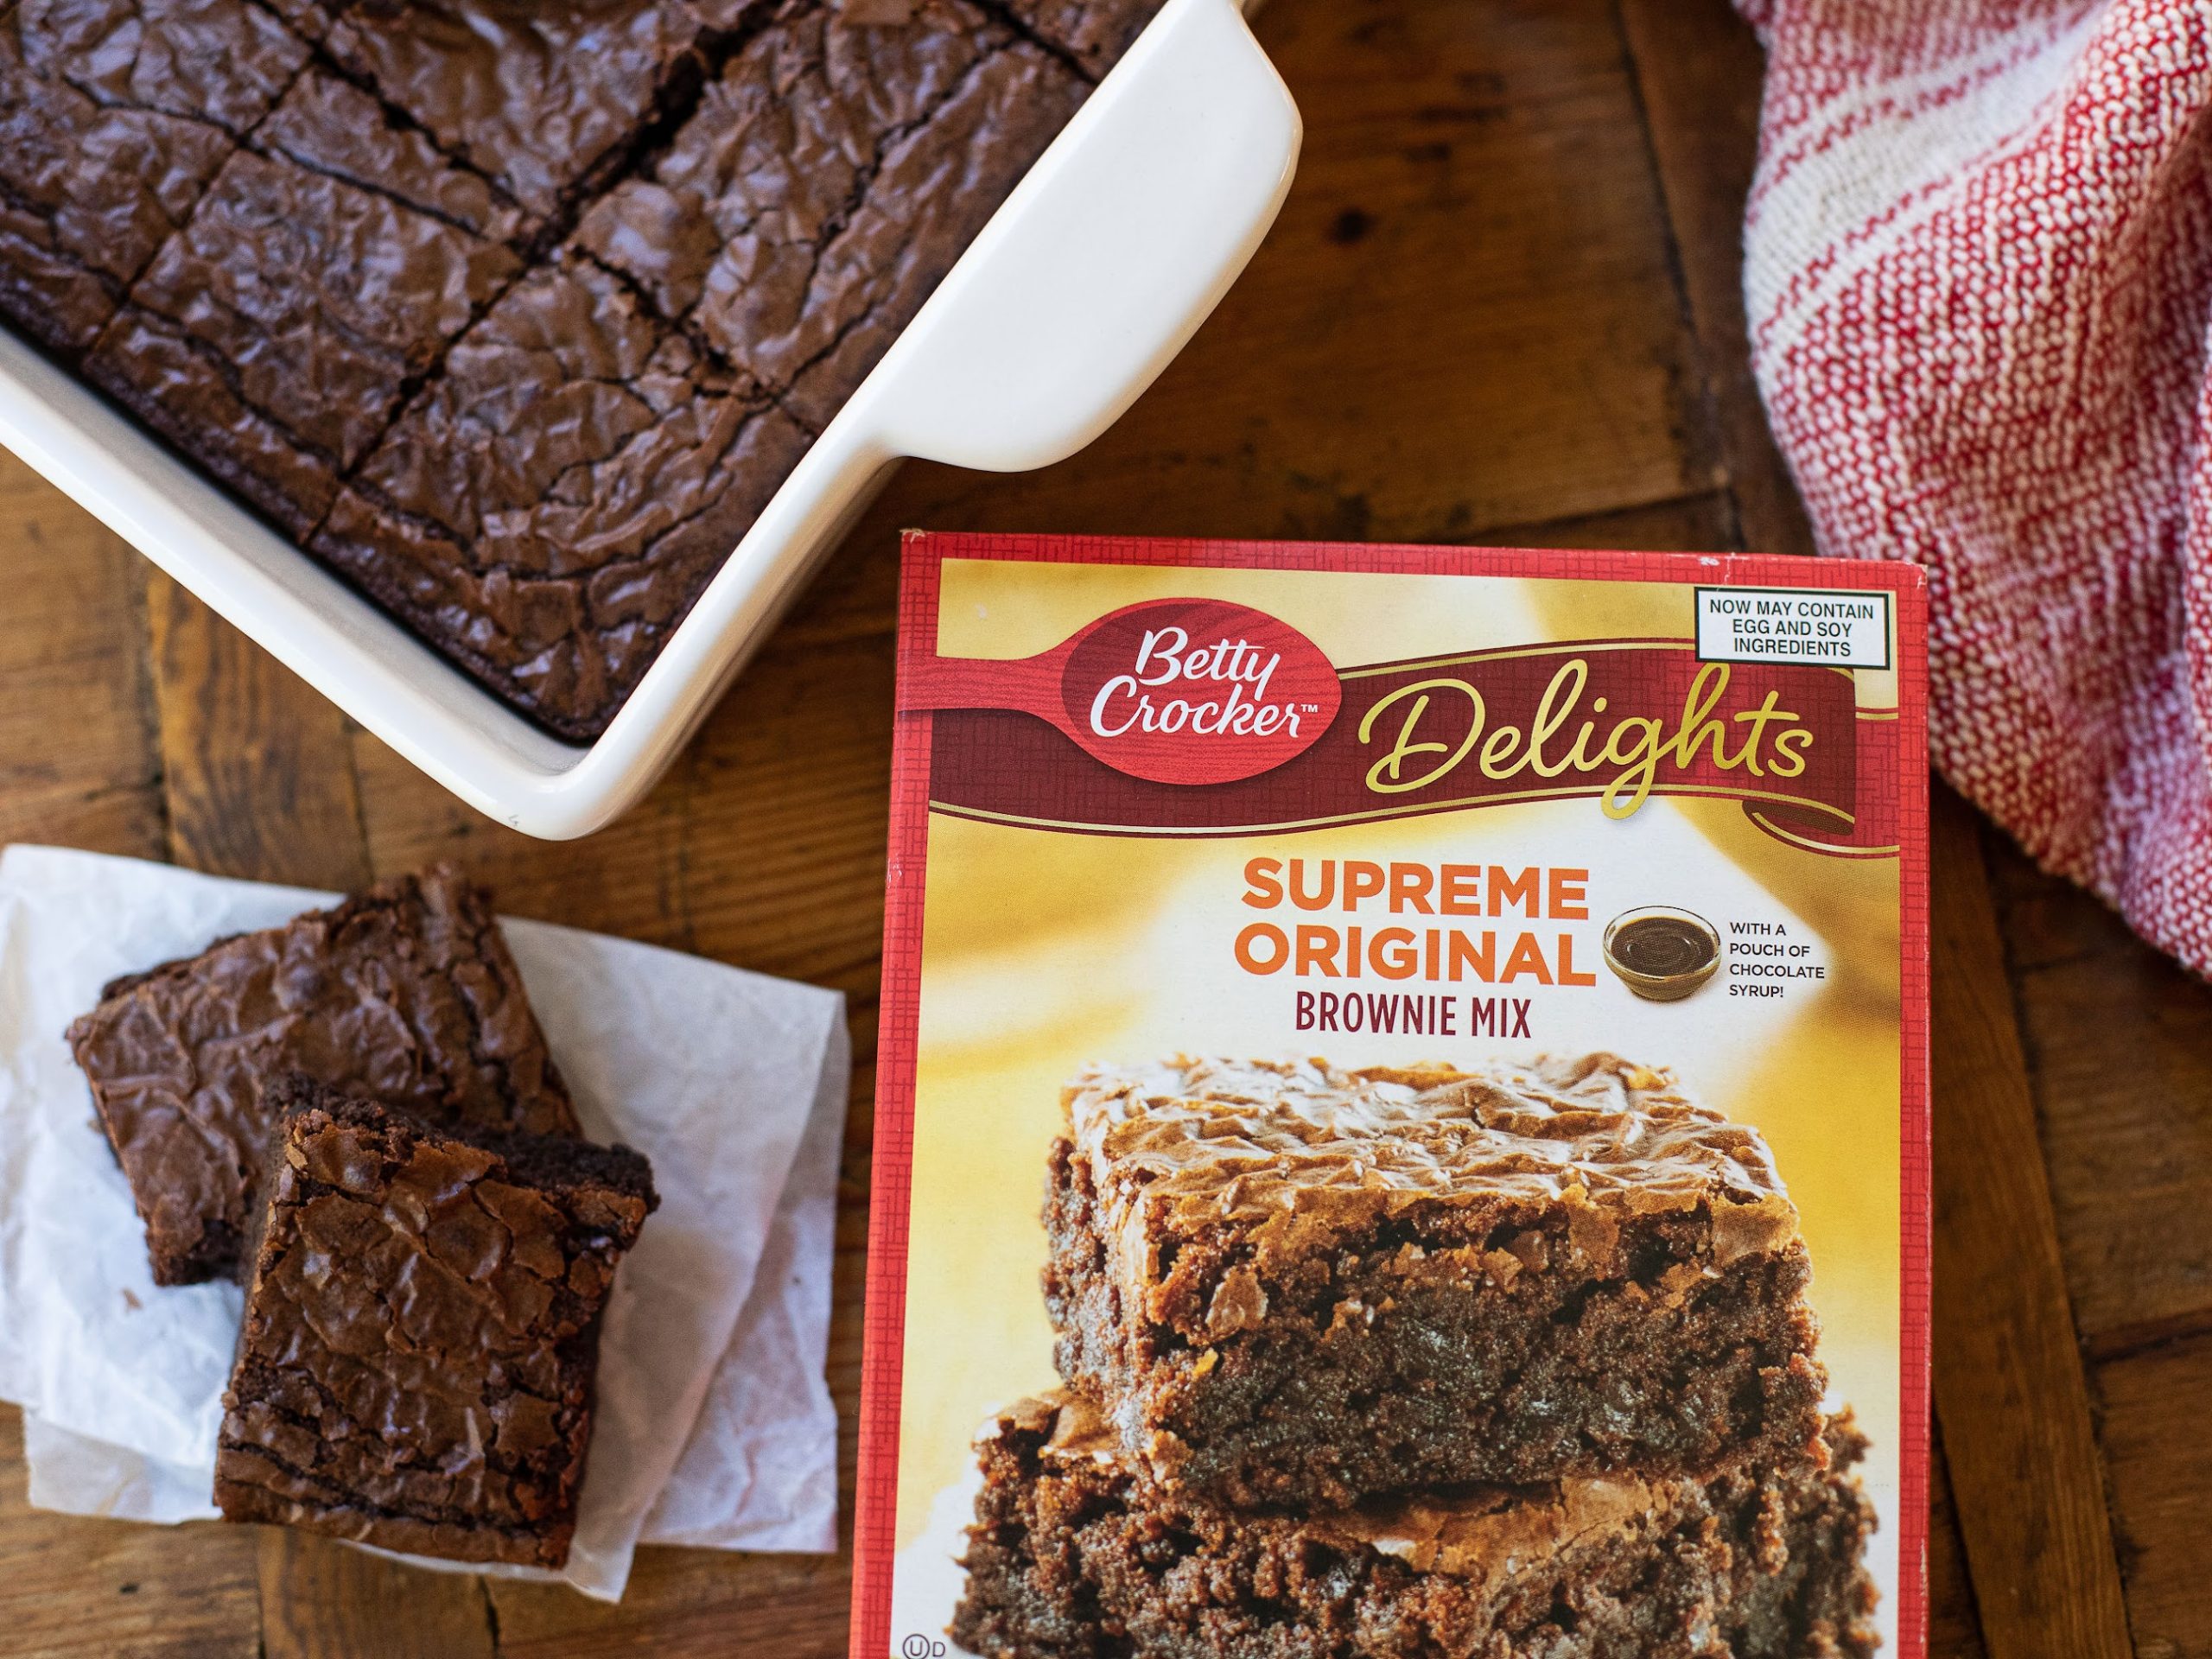 Get Betty Crocker Cake or Brownie Mix As Low As $1.17 At Publix